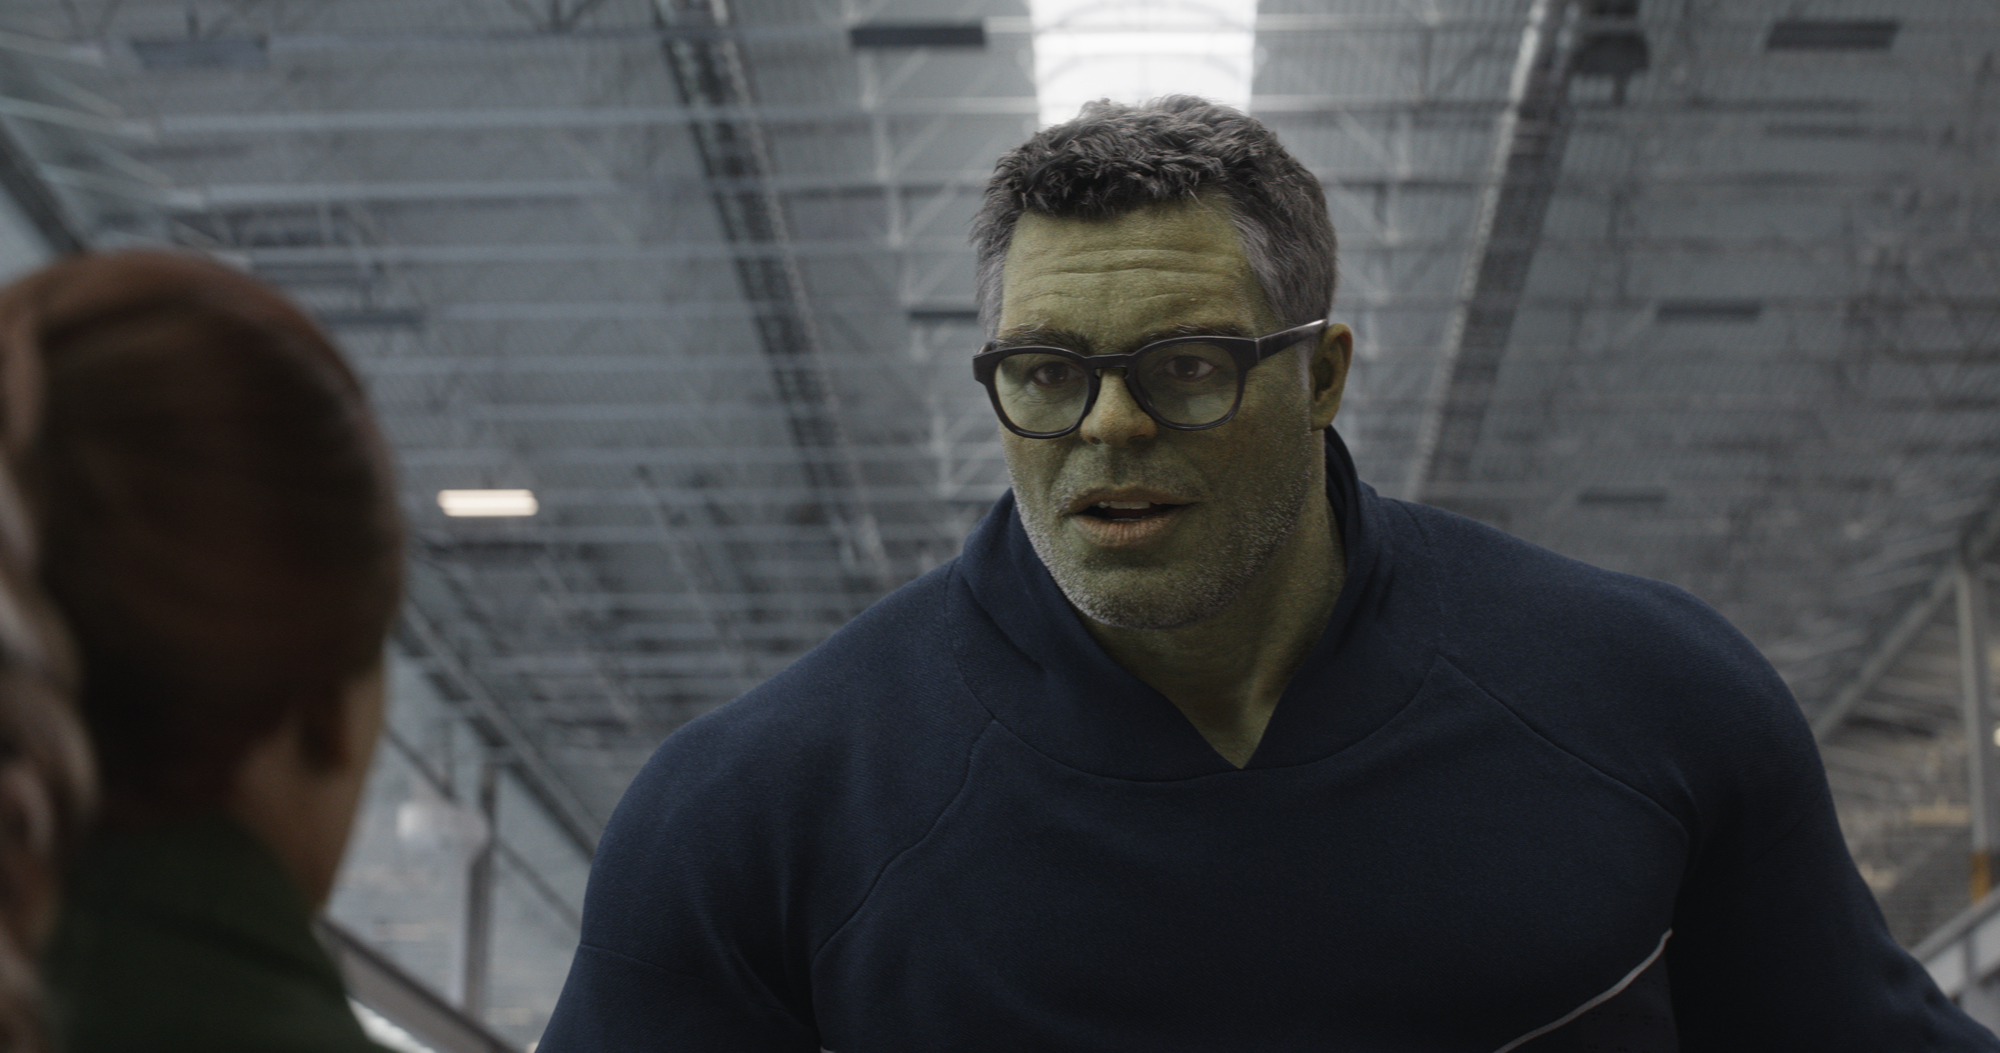 Avengers: Endgame – How Smart Hulk Was Brought To Life